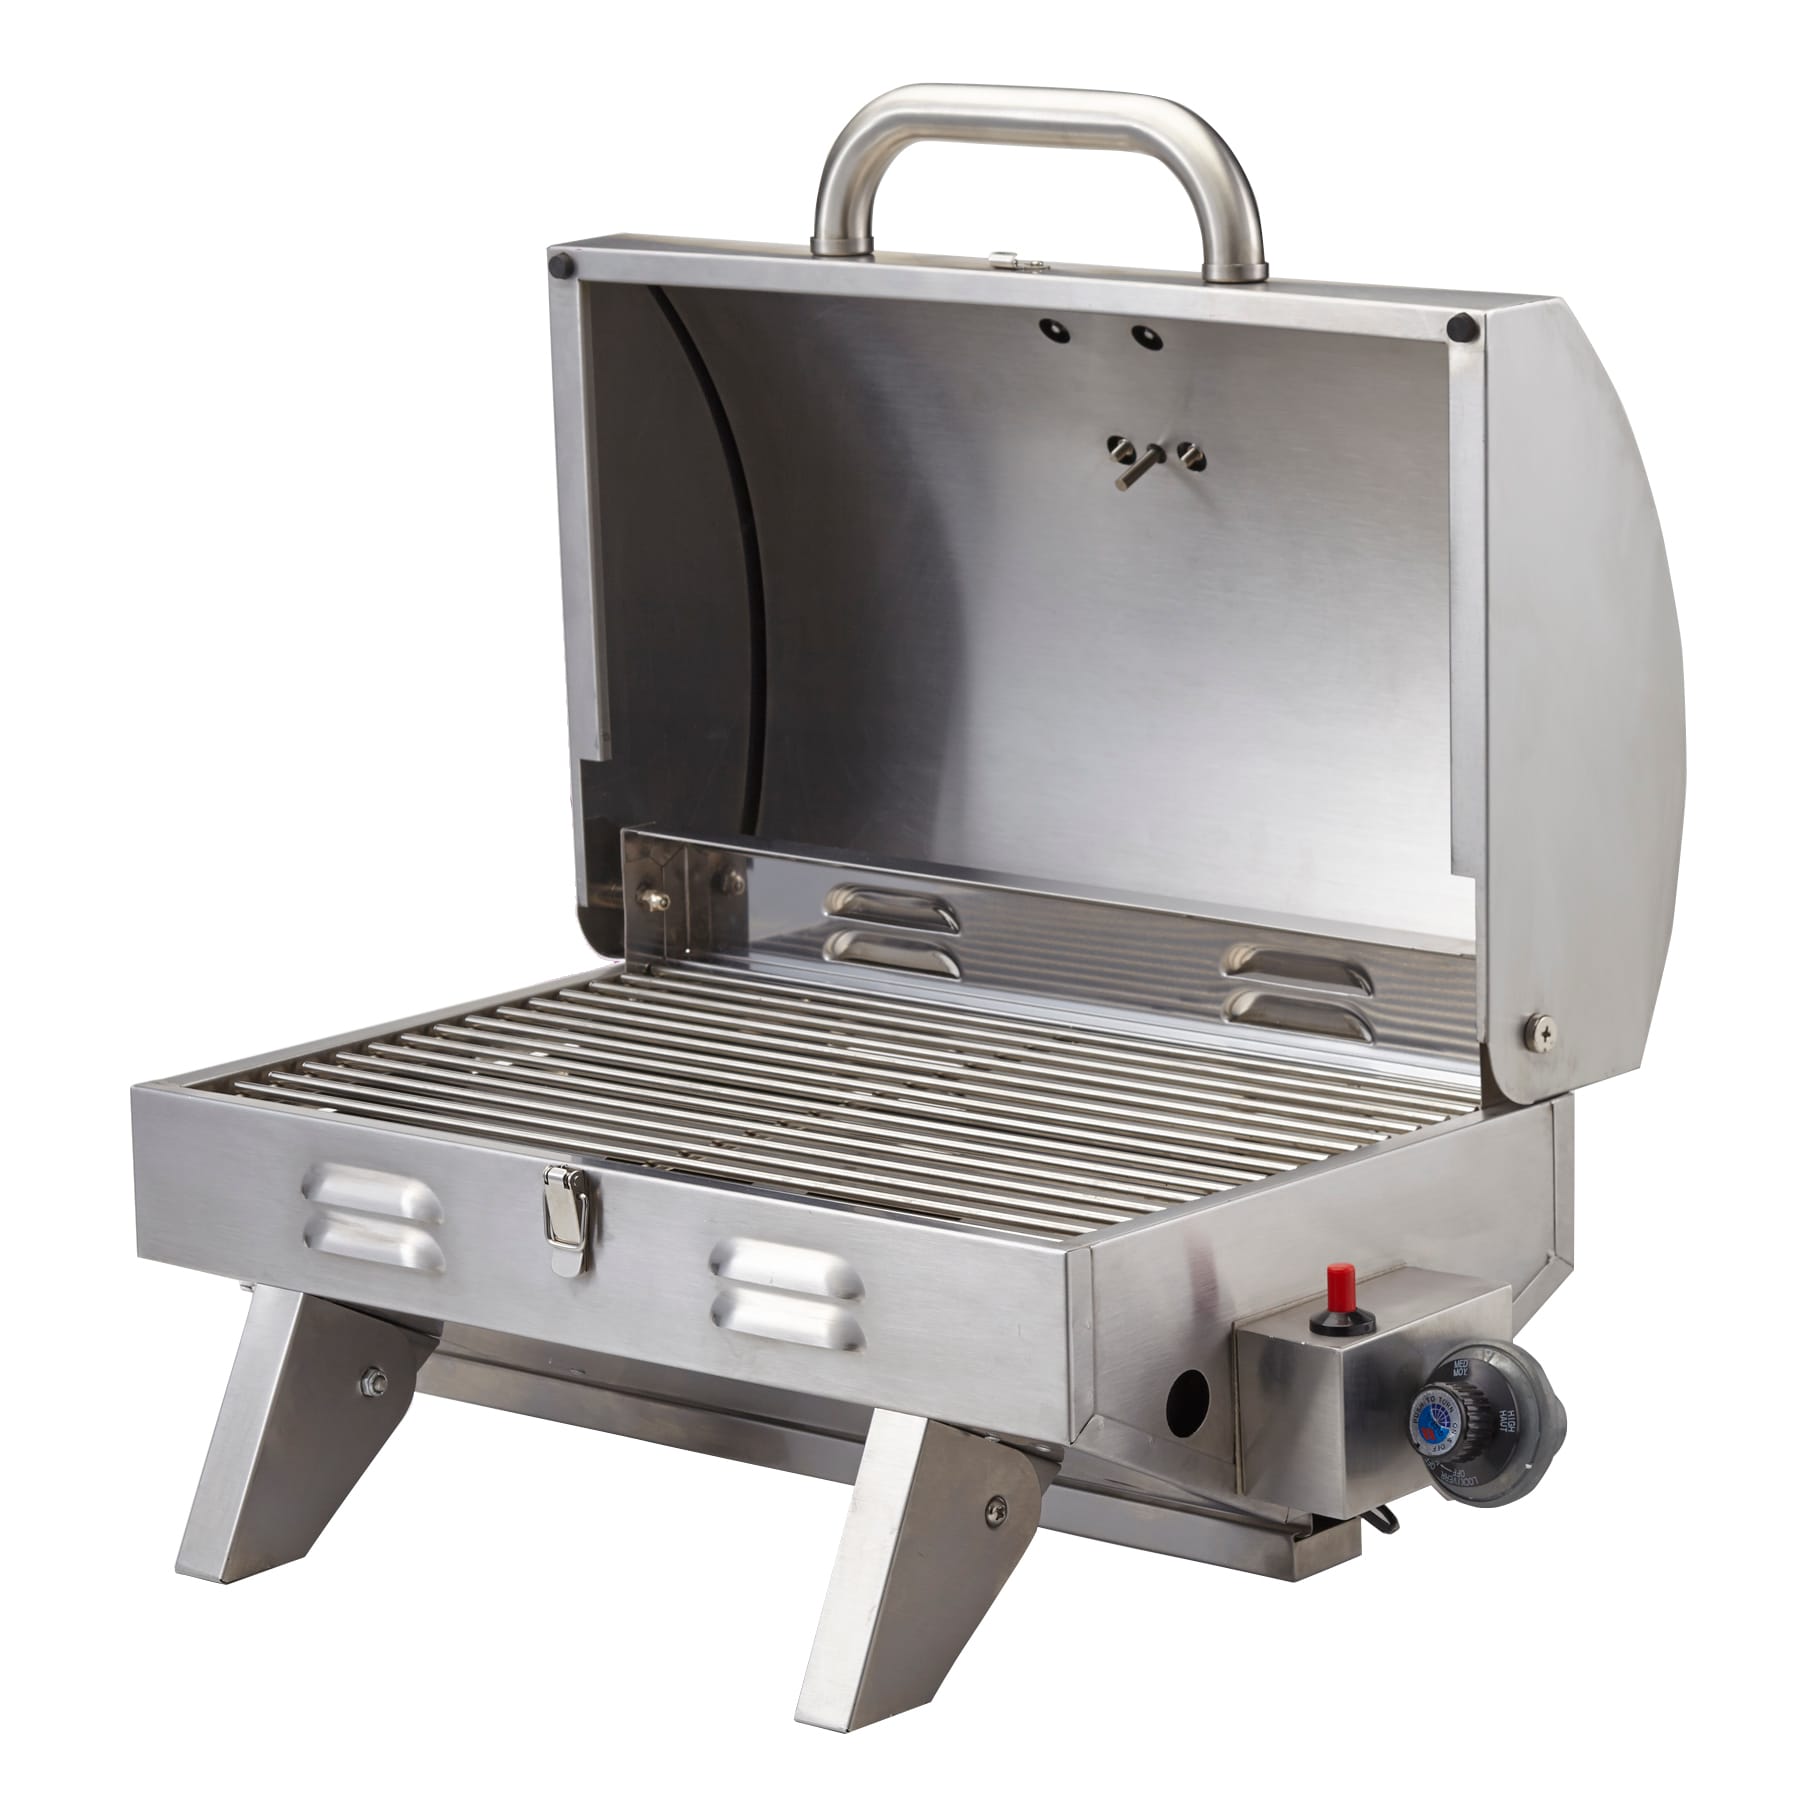 Cabela's Stainless Steel Tabletop Grill - Open